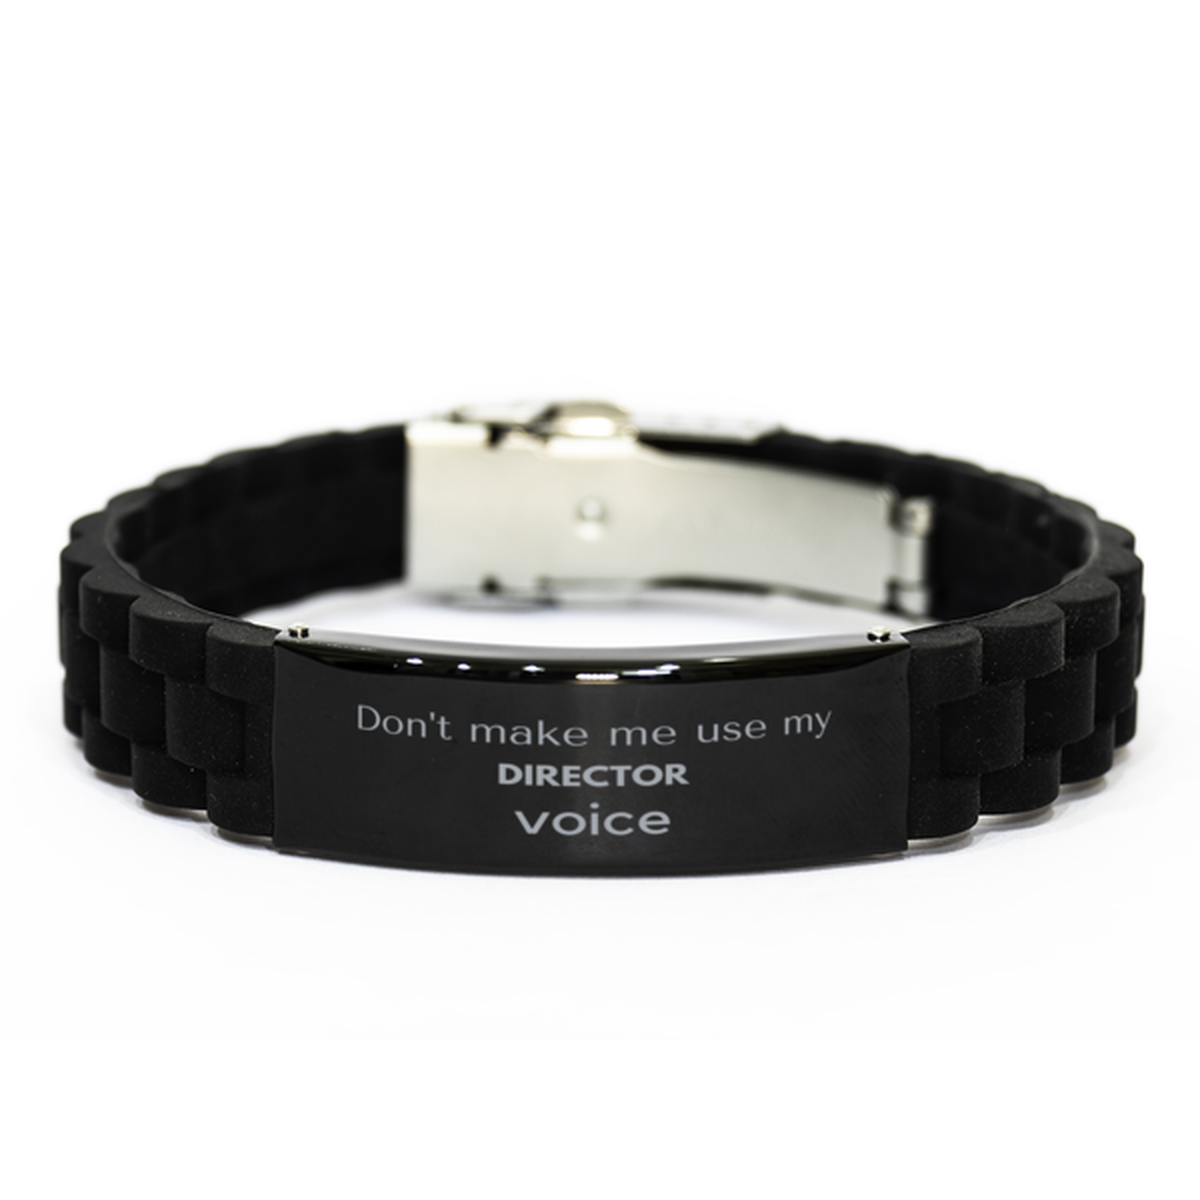 Don't make me use my Director voice, Sarcasm Director Gifts, Christmas Director Black Glidelock Clasp Bracelet Birthday Unique Gifts For Director Coworkers, Men, Women, Colleague, Friends